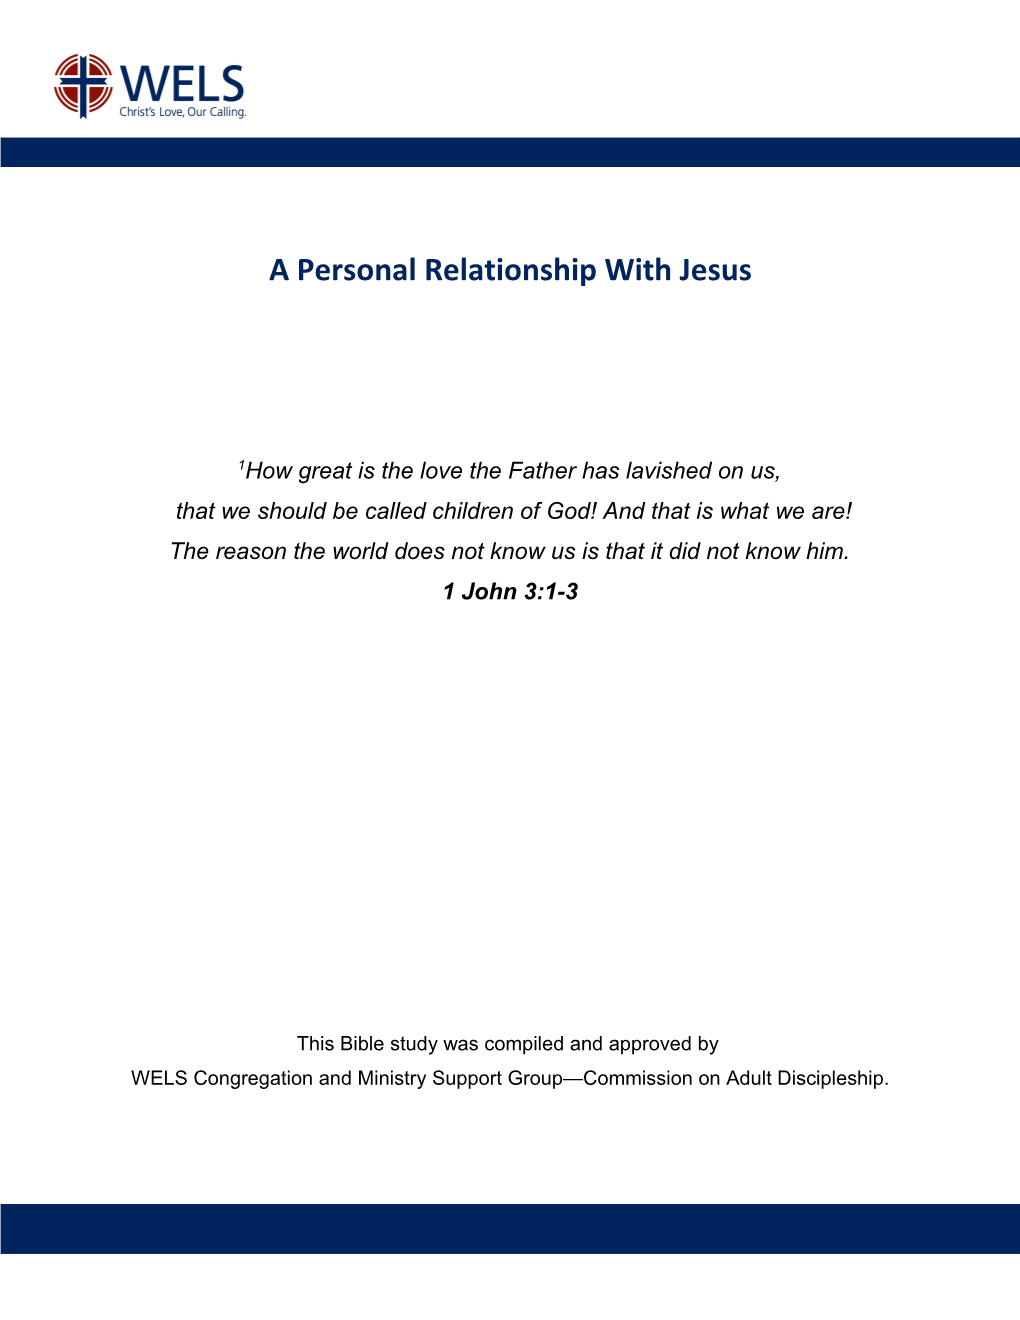 A Personal Relationship with Jesus